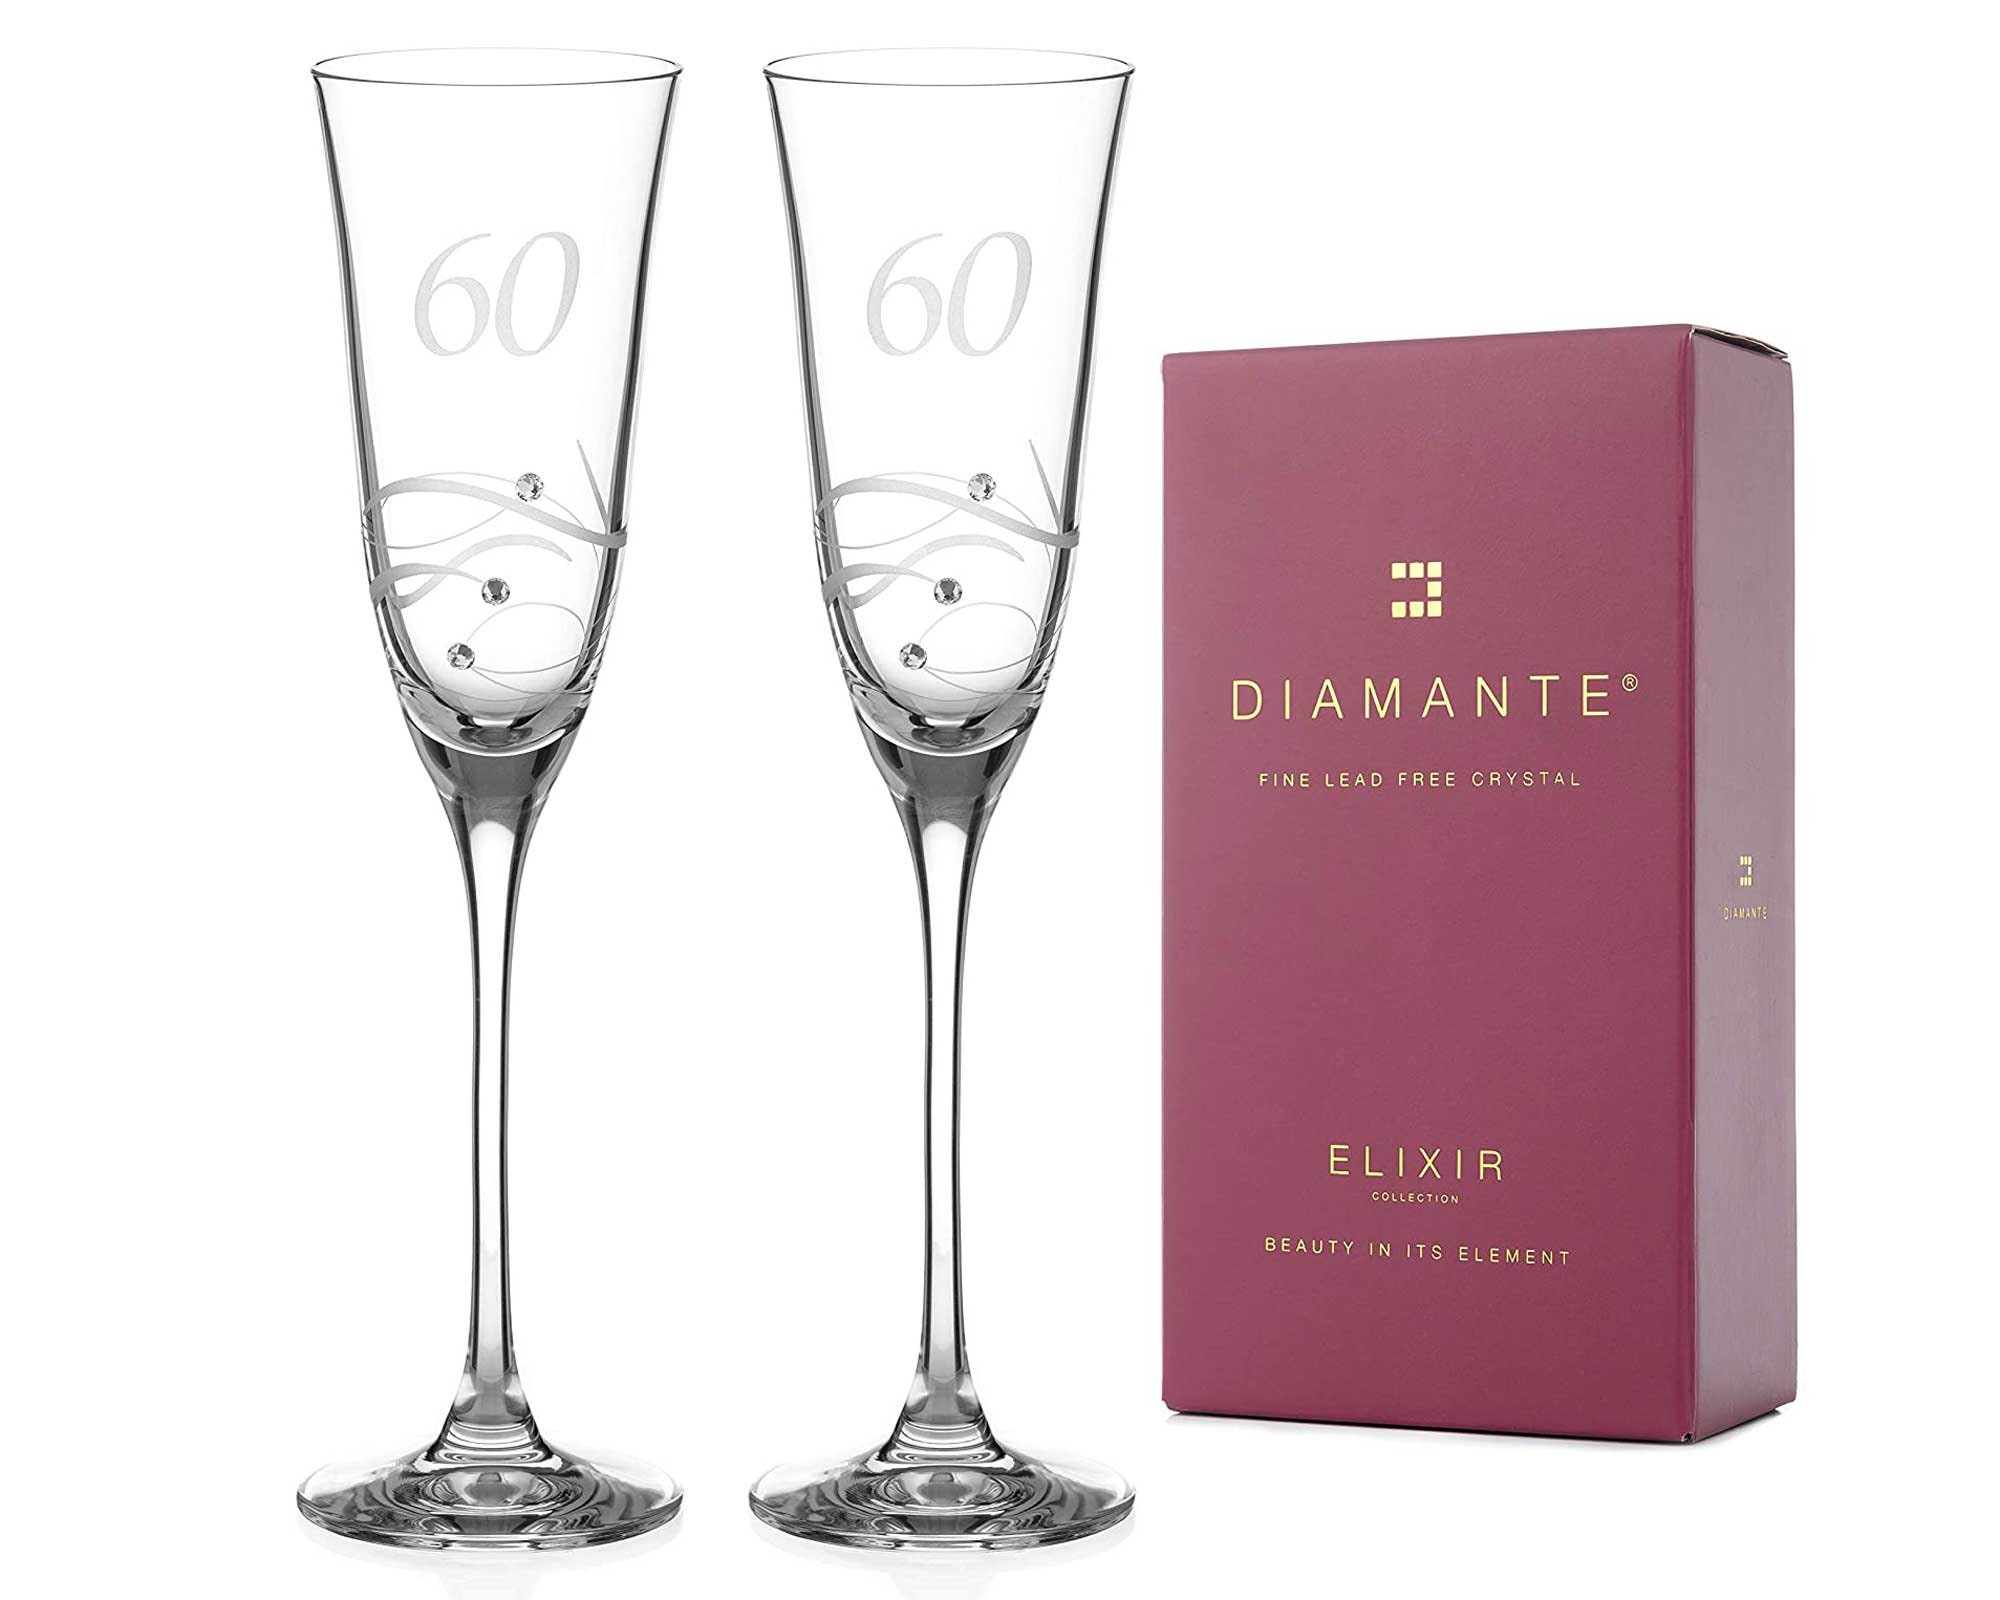 SWAVOKA Champagne Flutes - Crystal Champagne Flutes Glasses Set of 8, 7.1  Ounce Elegant Flutes with …See more SWAVOKA Champagne Flutes - Crystal